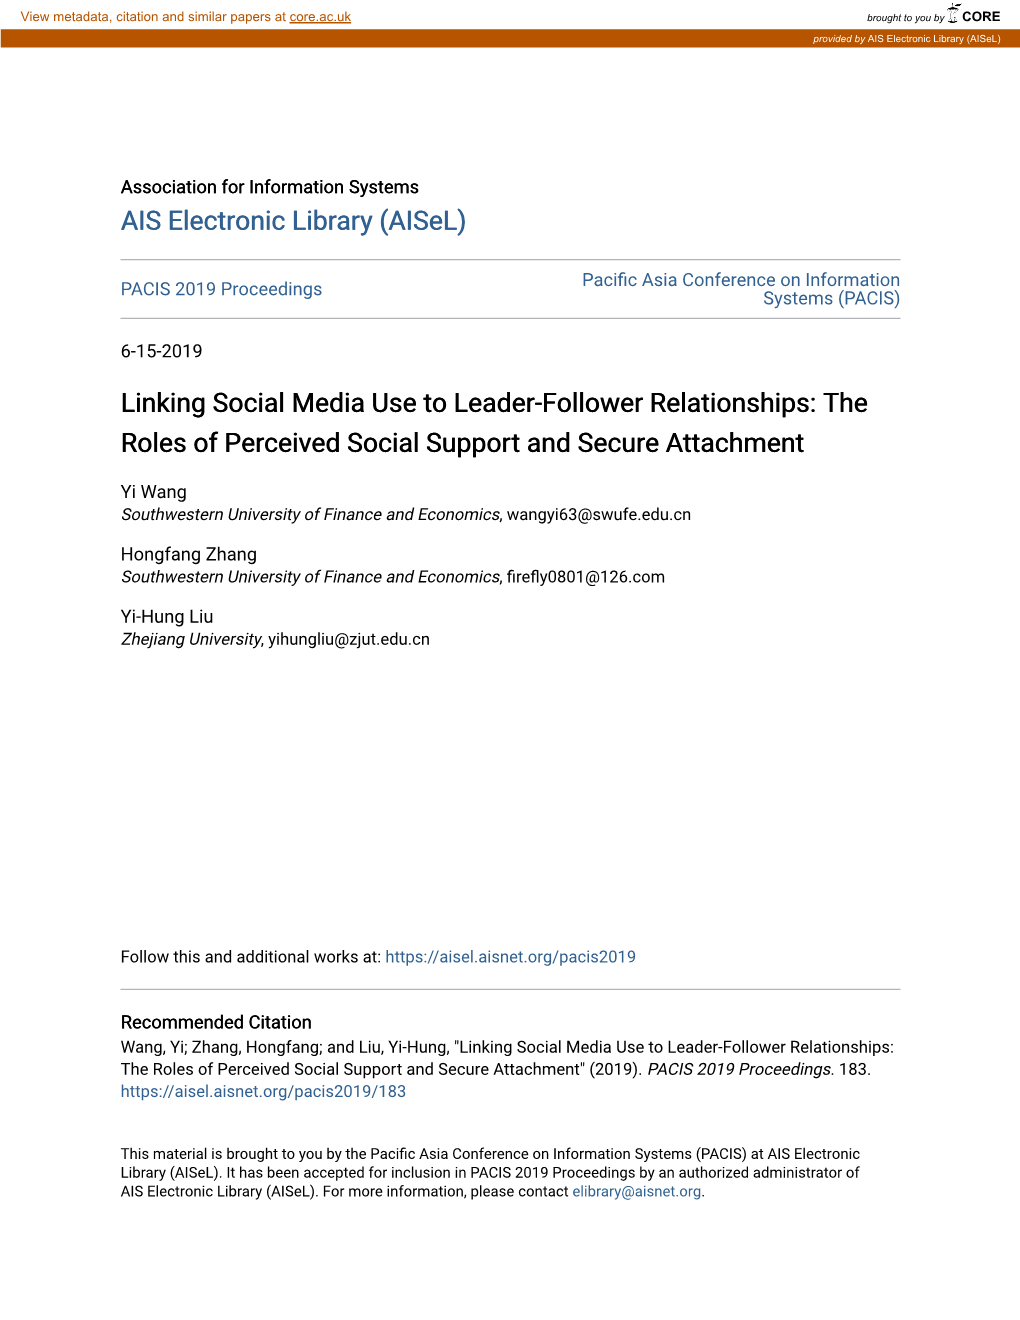 Linking Social Media Use to Leader-Follower Relationships: the Roles of Perceived Social Support and Secure Attachment